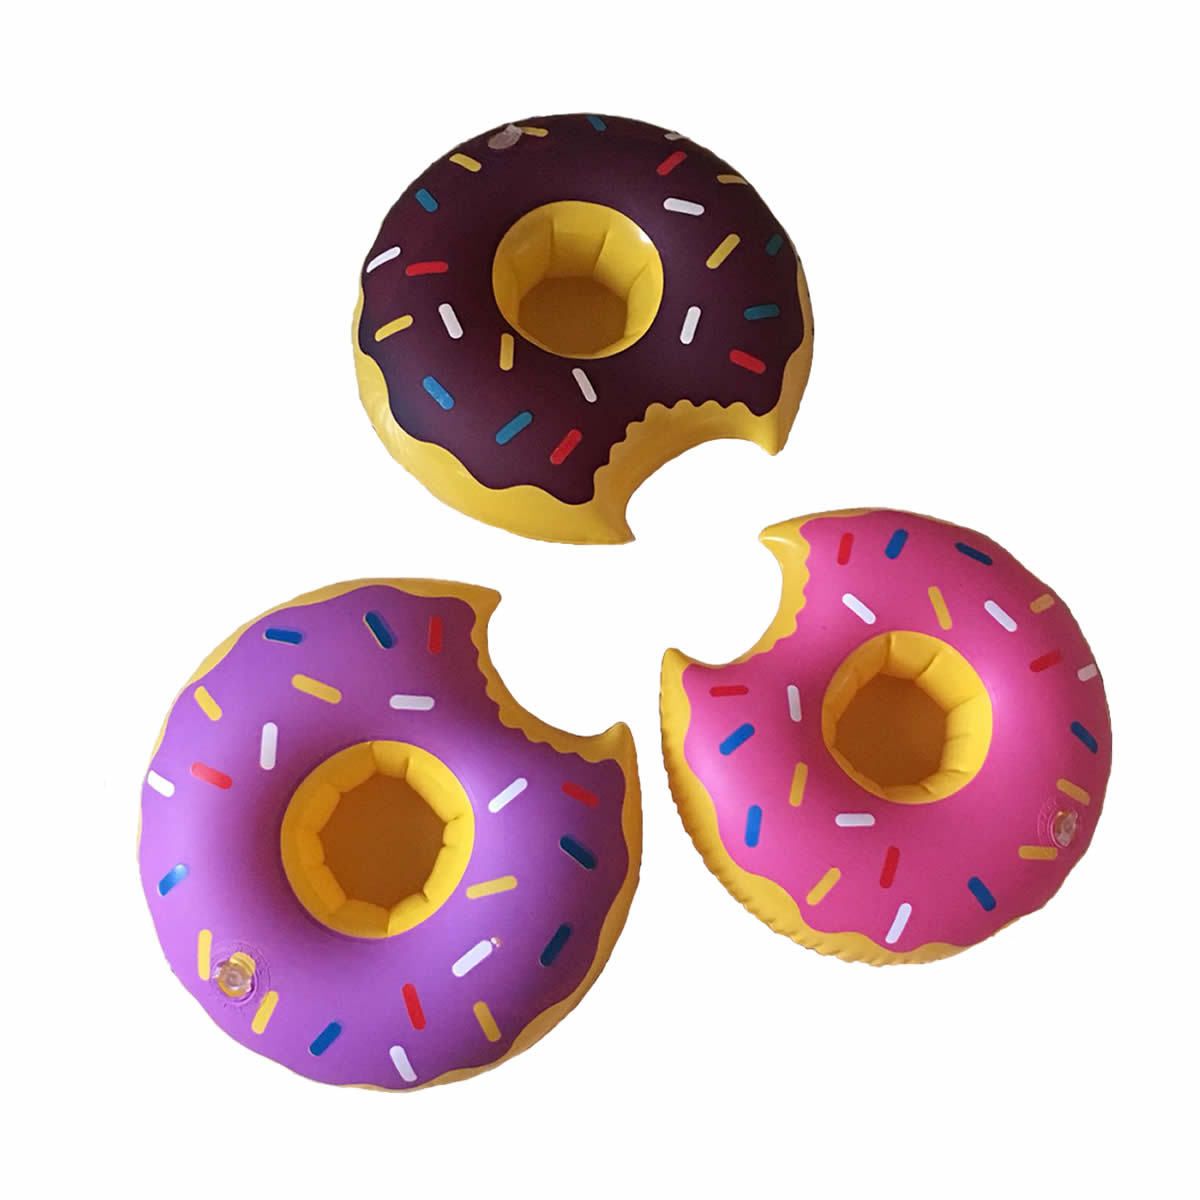 Donut Pool Drink Holder Floats Pineapple Watermelon Kiwi Floating Inflatable  Cup Holders For Pool Party Decorations From Superwholesale, $0.64 |  DHgate.Com